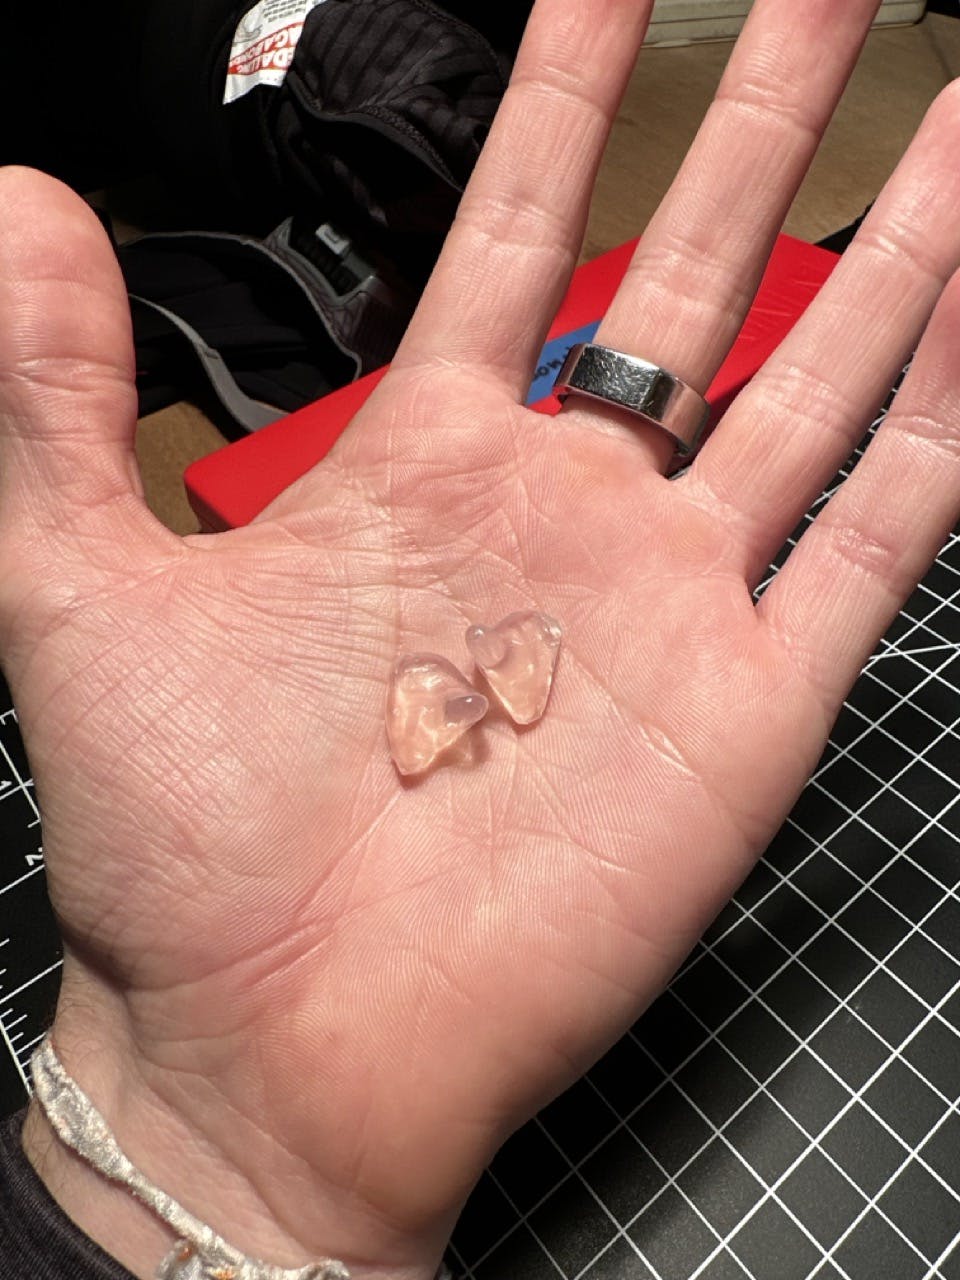 A photo of two ear plugs in a palm of a hand